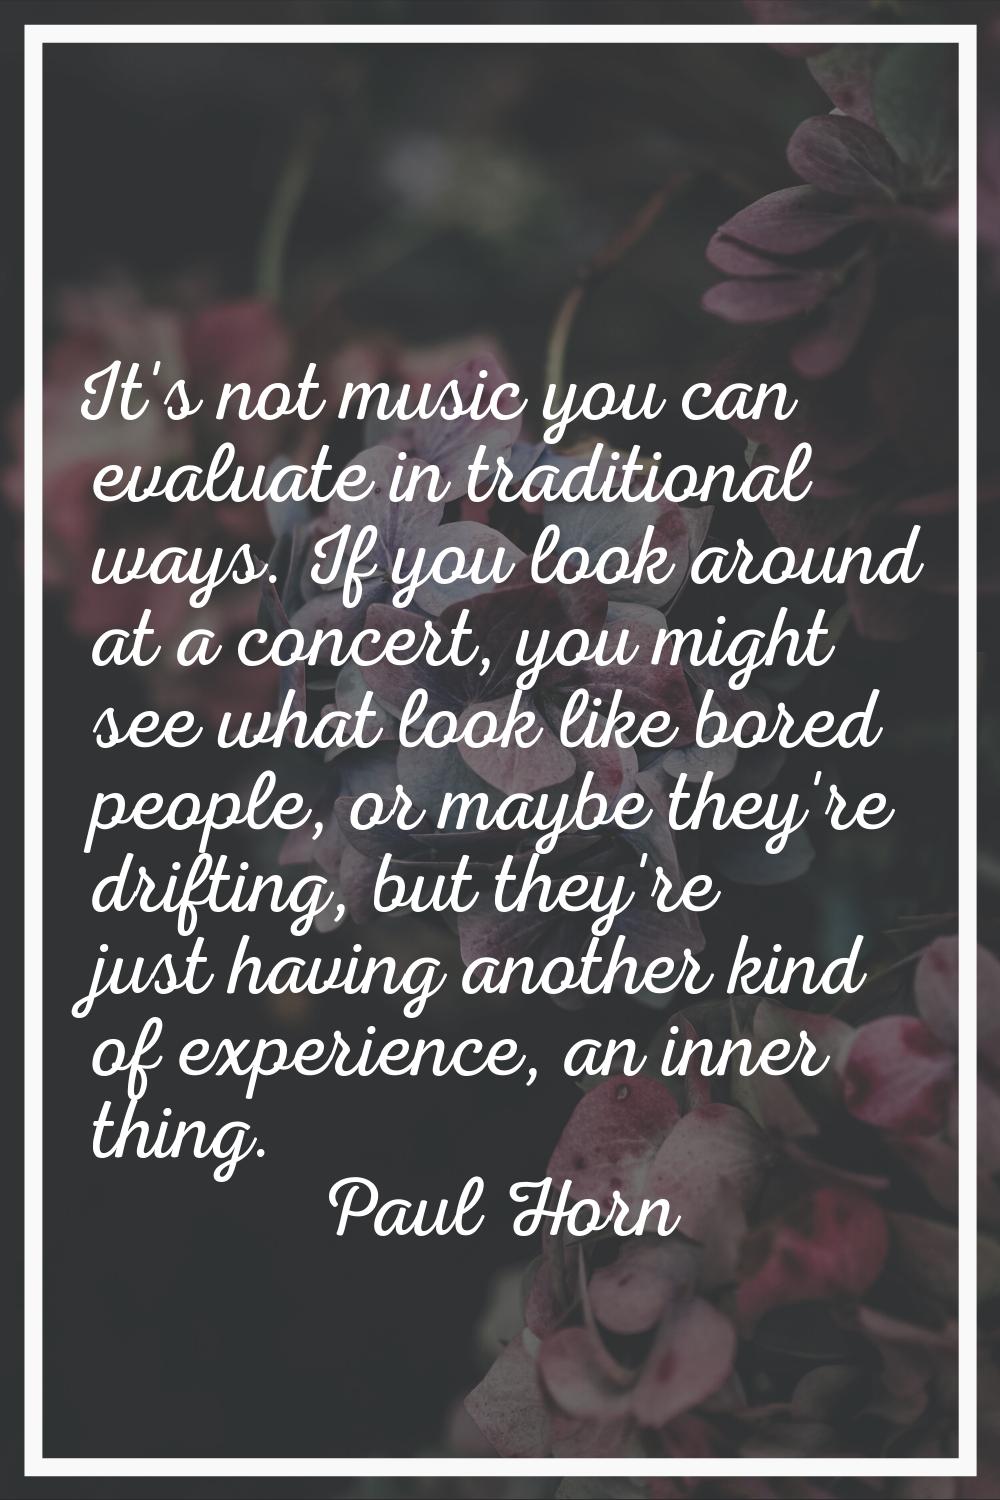 It's not music you can evaluate in traditional ways. If you look around at a concert, you might see